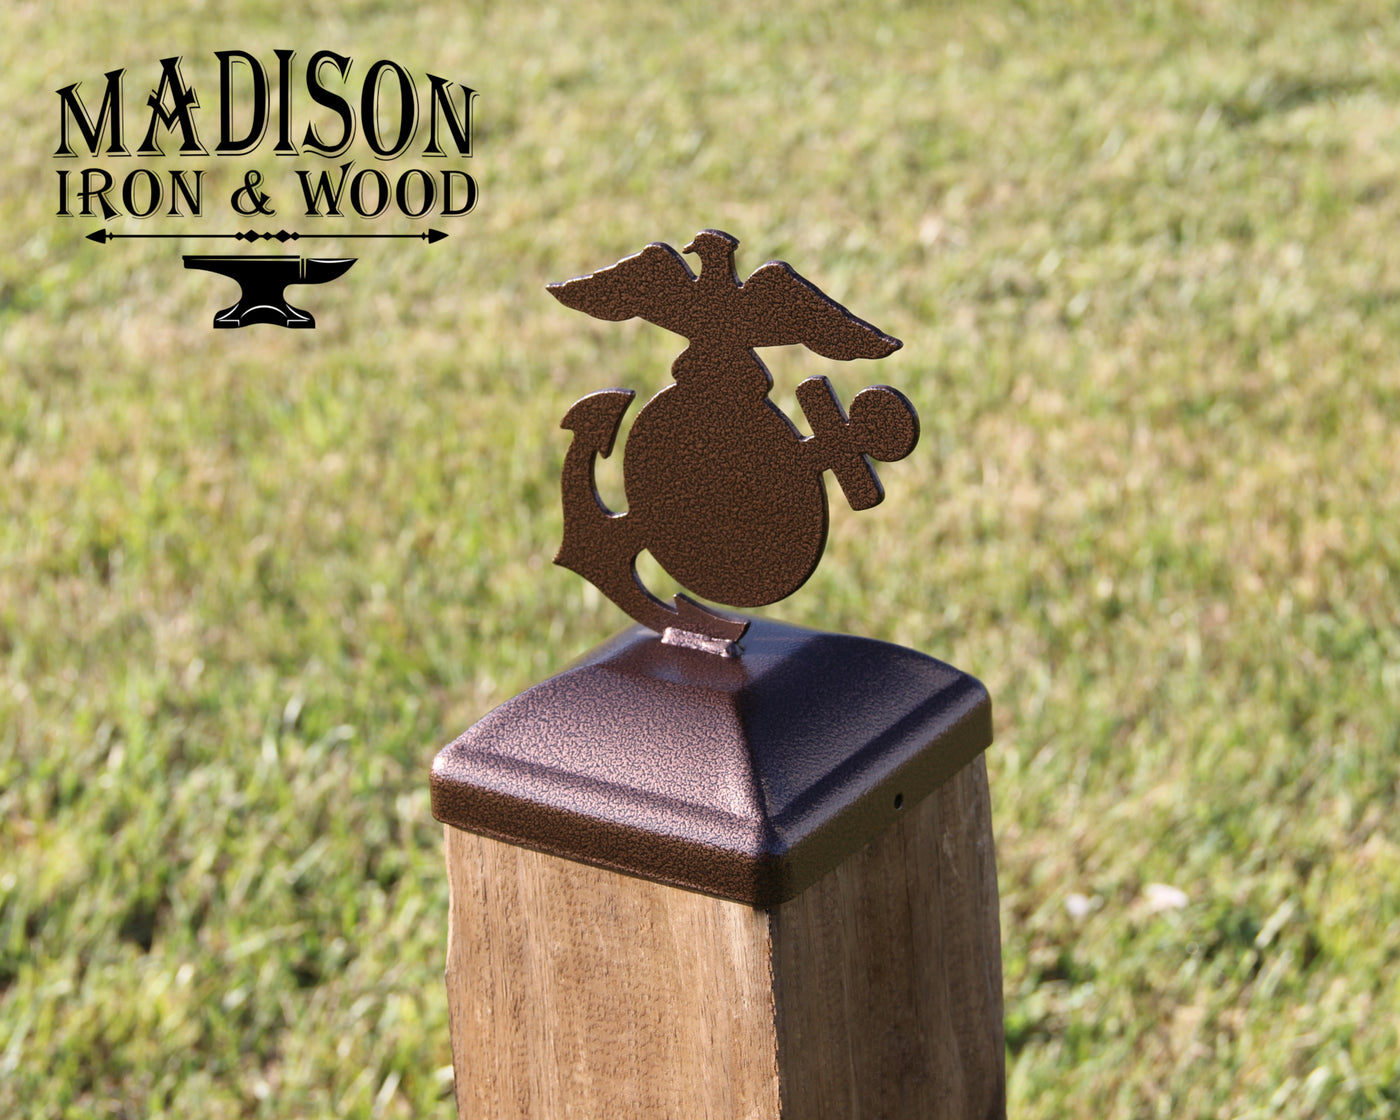 6x6 Marines Logo Post Cap - Madison Iron and Wood - Post Cap - metal outdoor decor - Steel deocrations - american made products - veteran owned business products - fencing decorations - fencing supplies - custom wall decorations - personalized wall signs - steel - decorative post caps - steel post caps - metal post caps - brackets - structural brackets - home improvement - easter - easter decorations - easter gift - easter yard decor